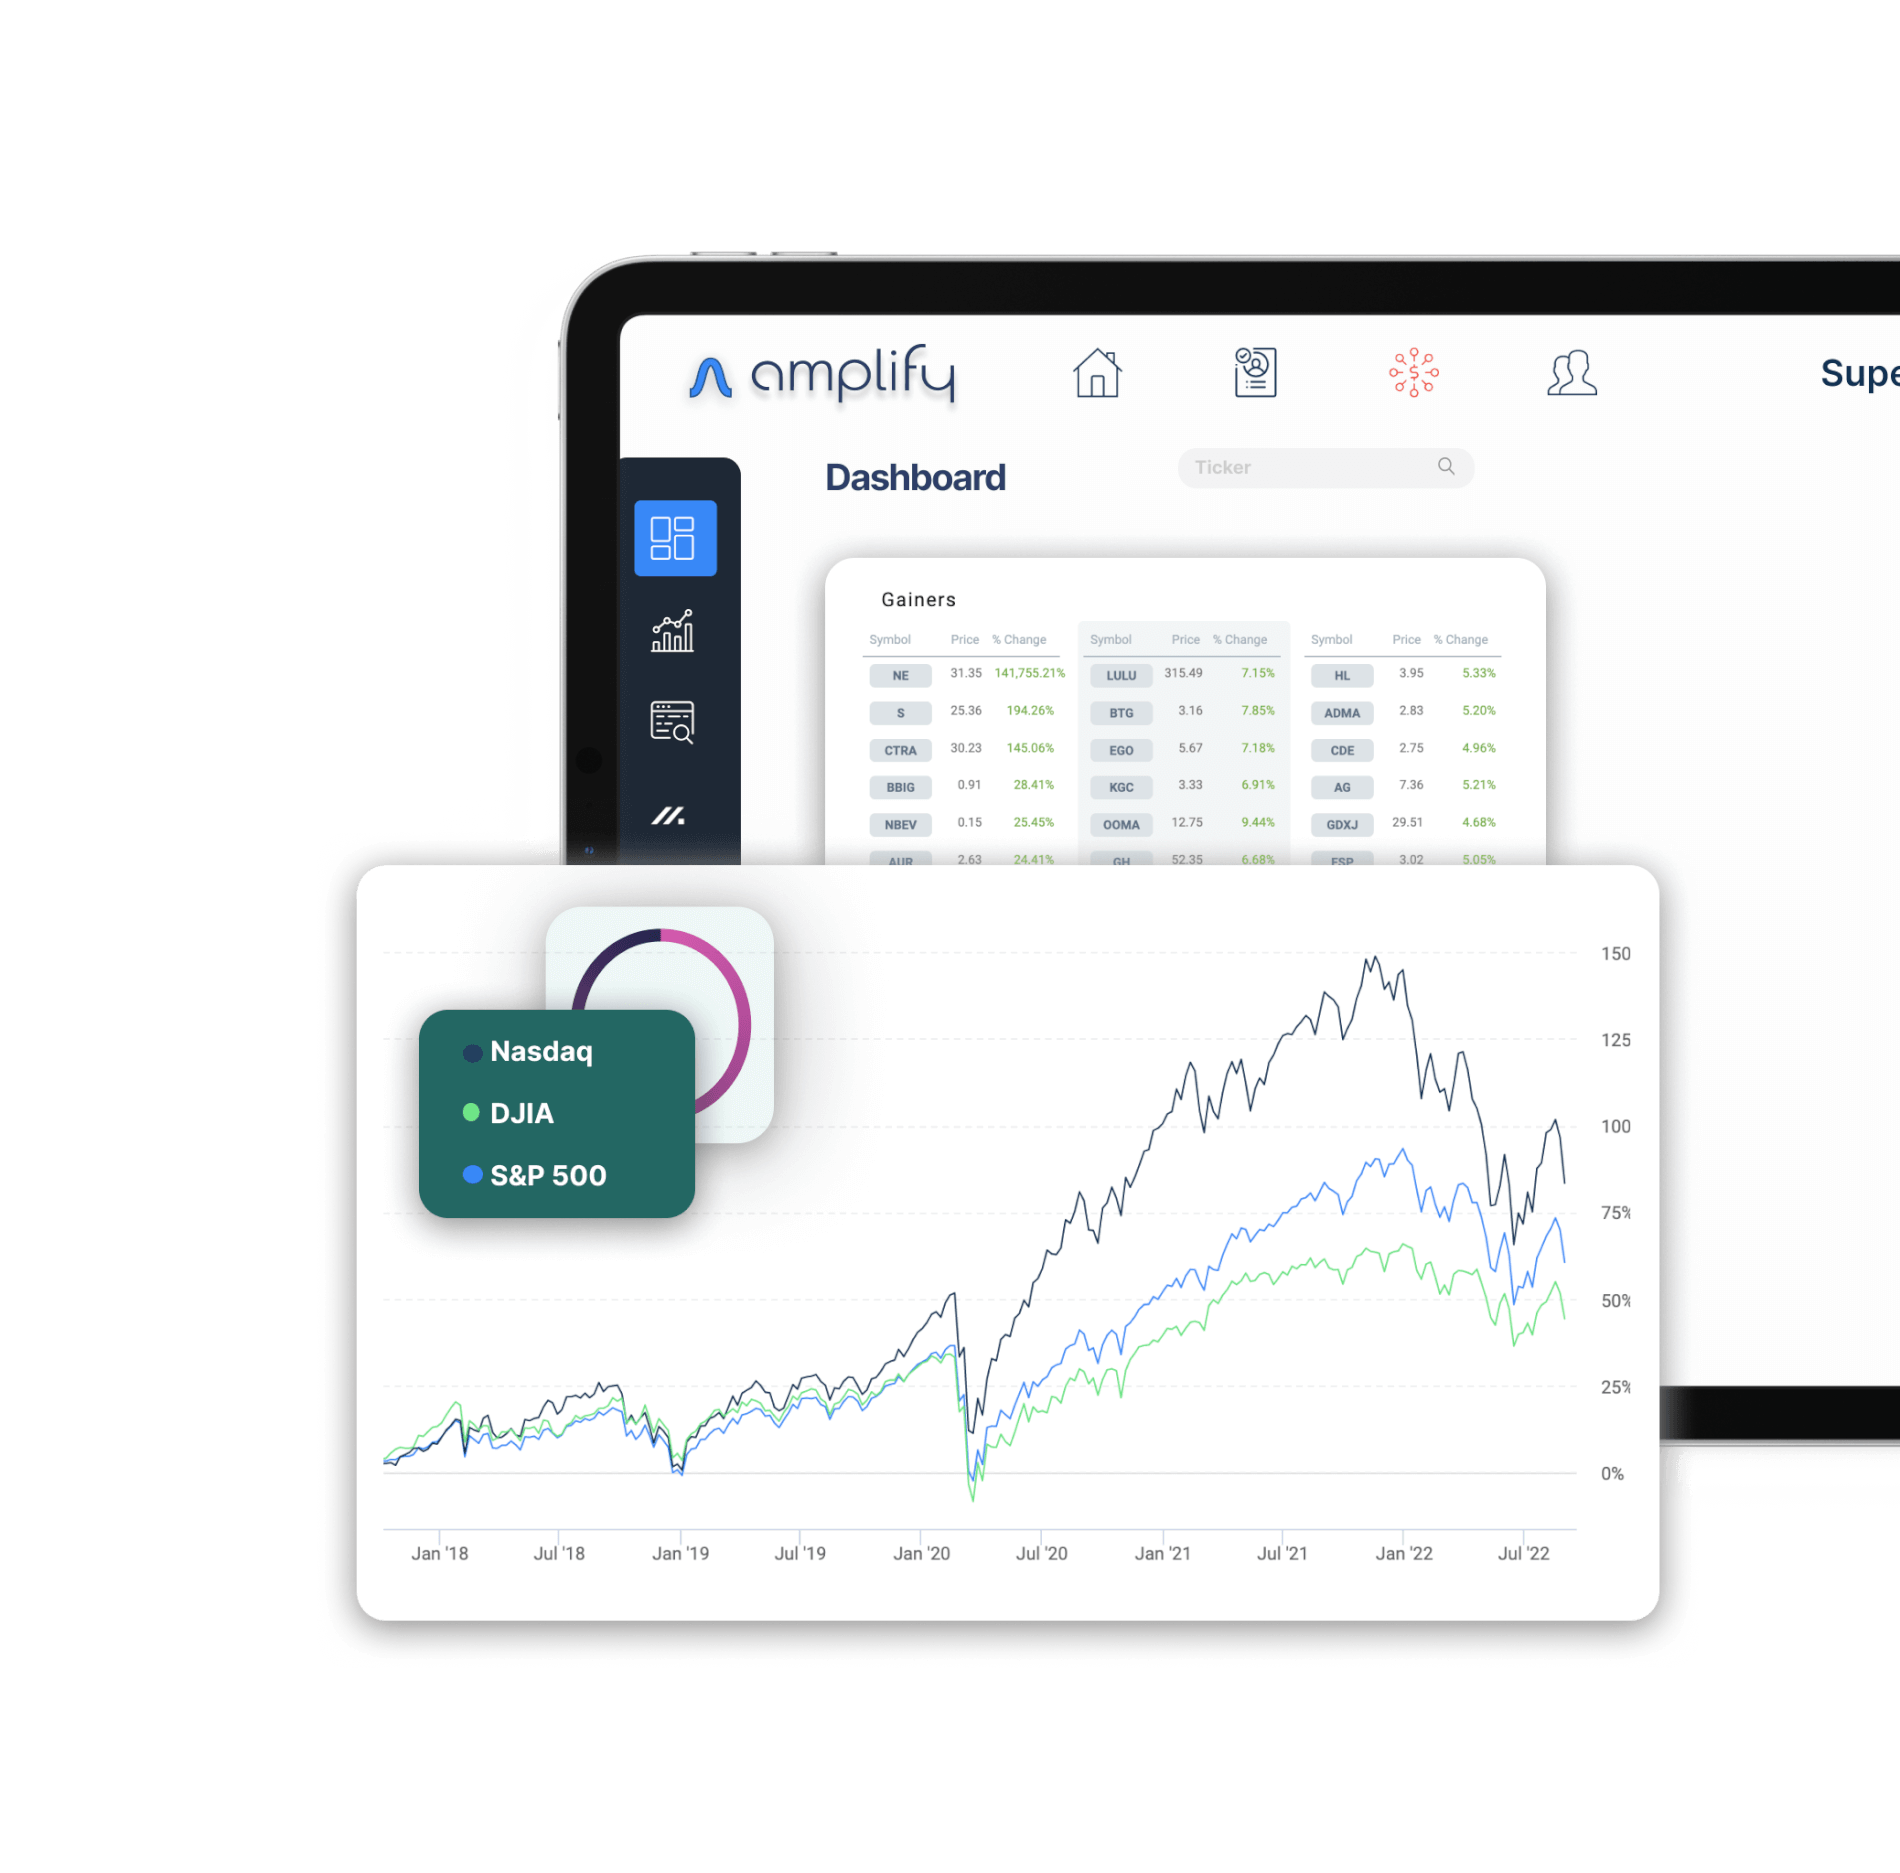 A screenshot of Amplify's Research screen. Shows a table with various tickers with their current price and percent change. Also pictured on the screen is a line graph comparing the performance of the Nasdaq, DJIA, and S&P 500.